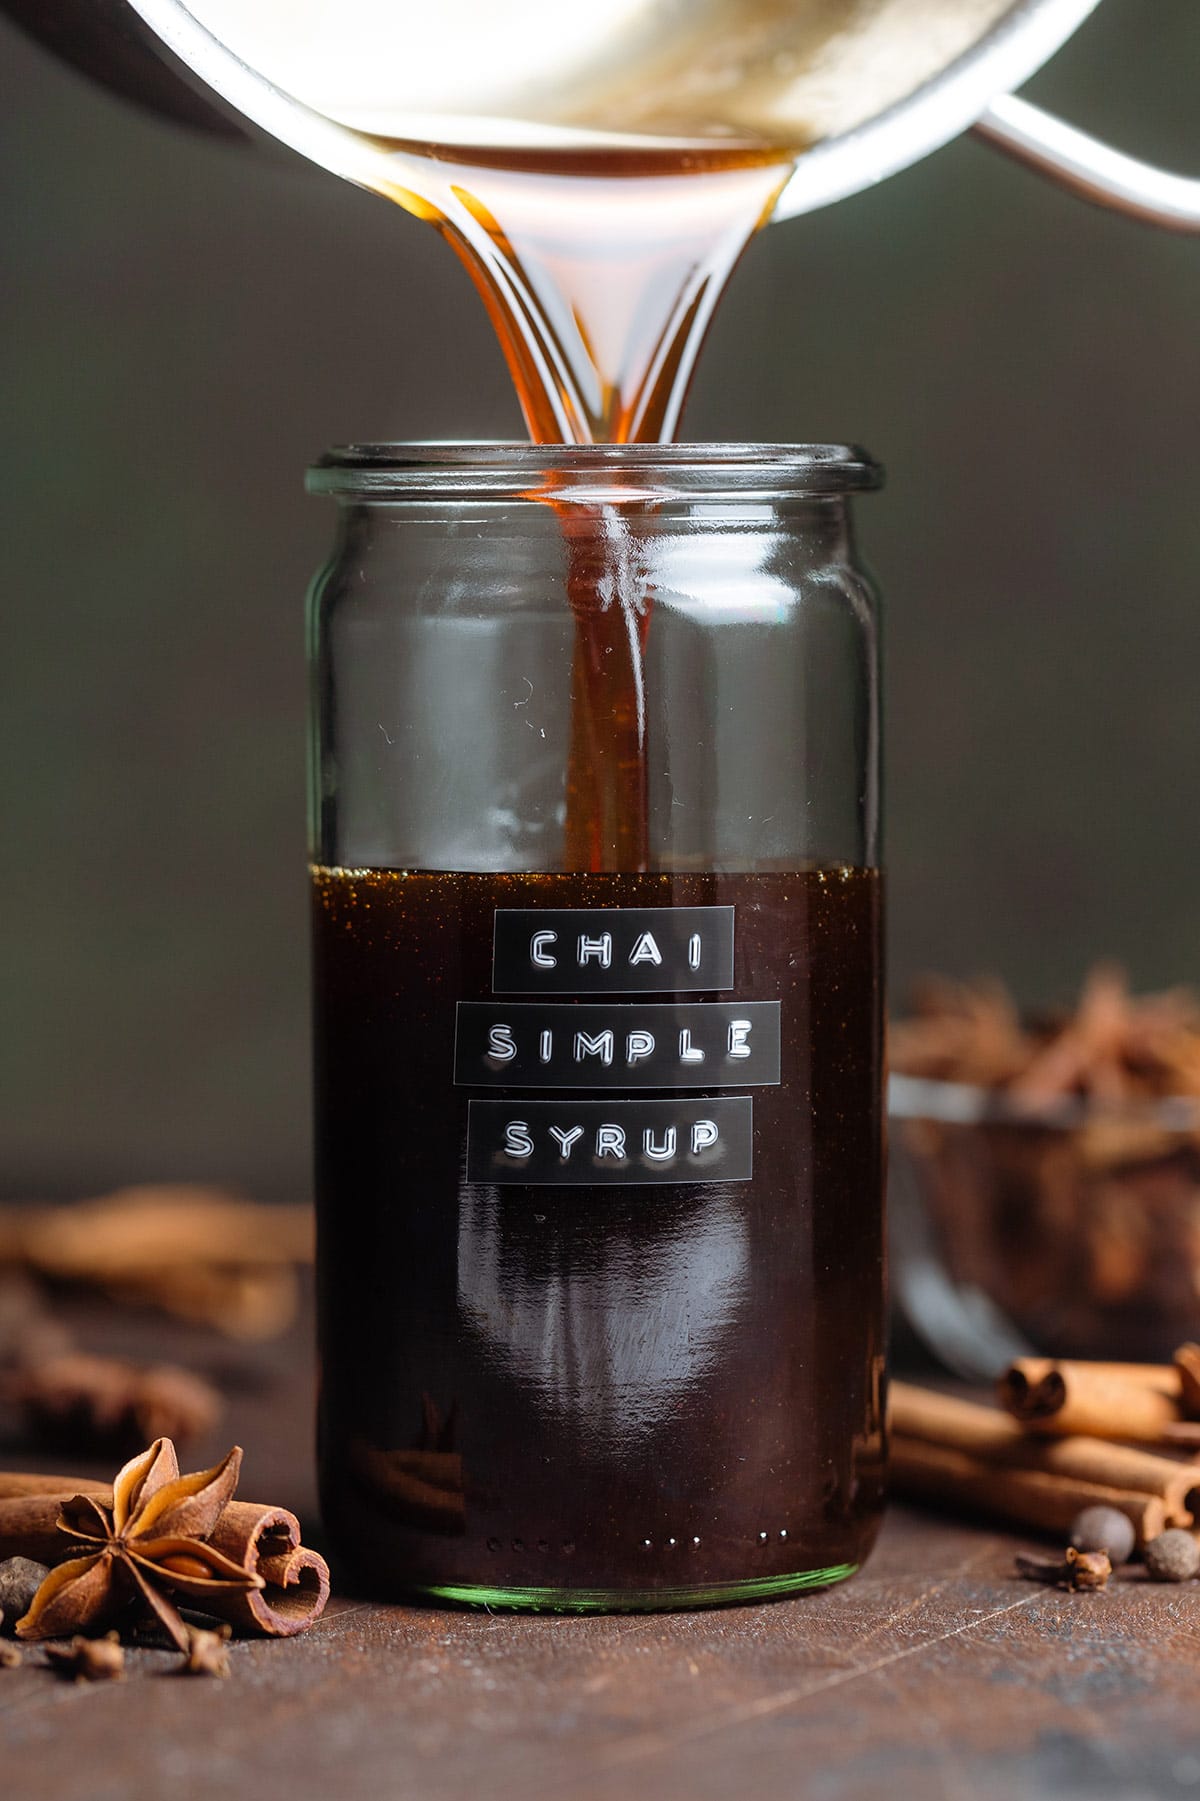 Dark syrup being poured into a glass jar with embossed label that says chai simple syrup.